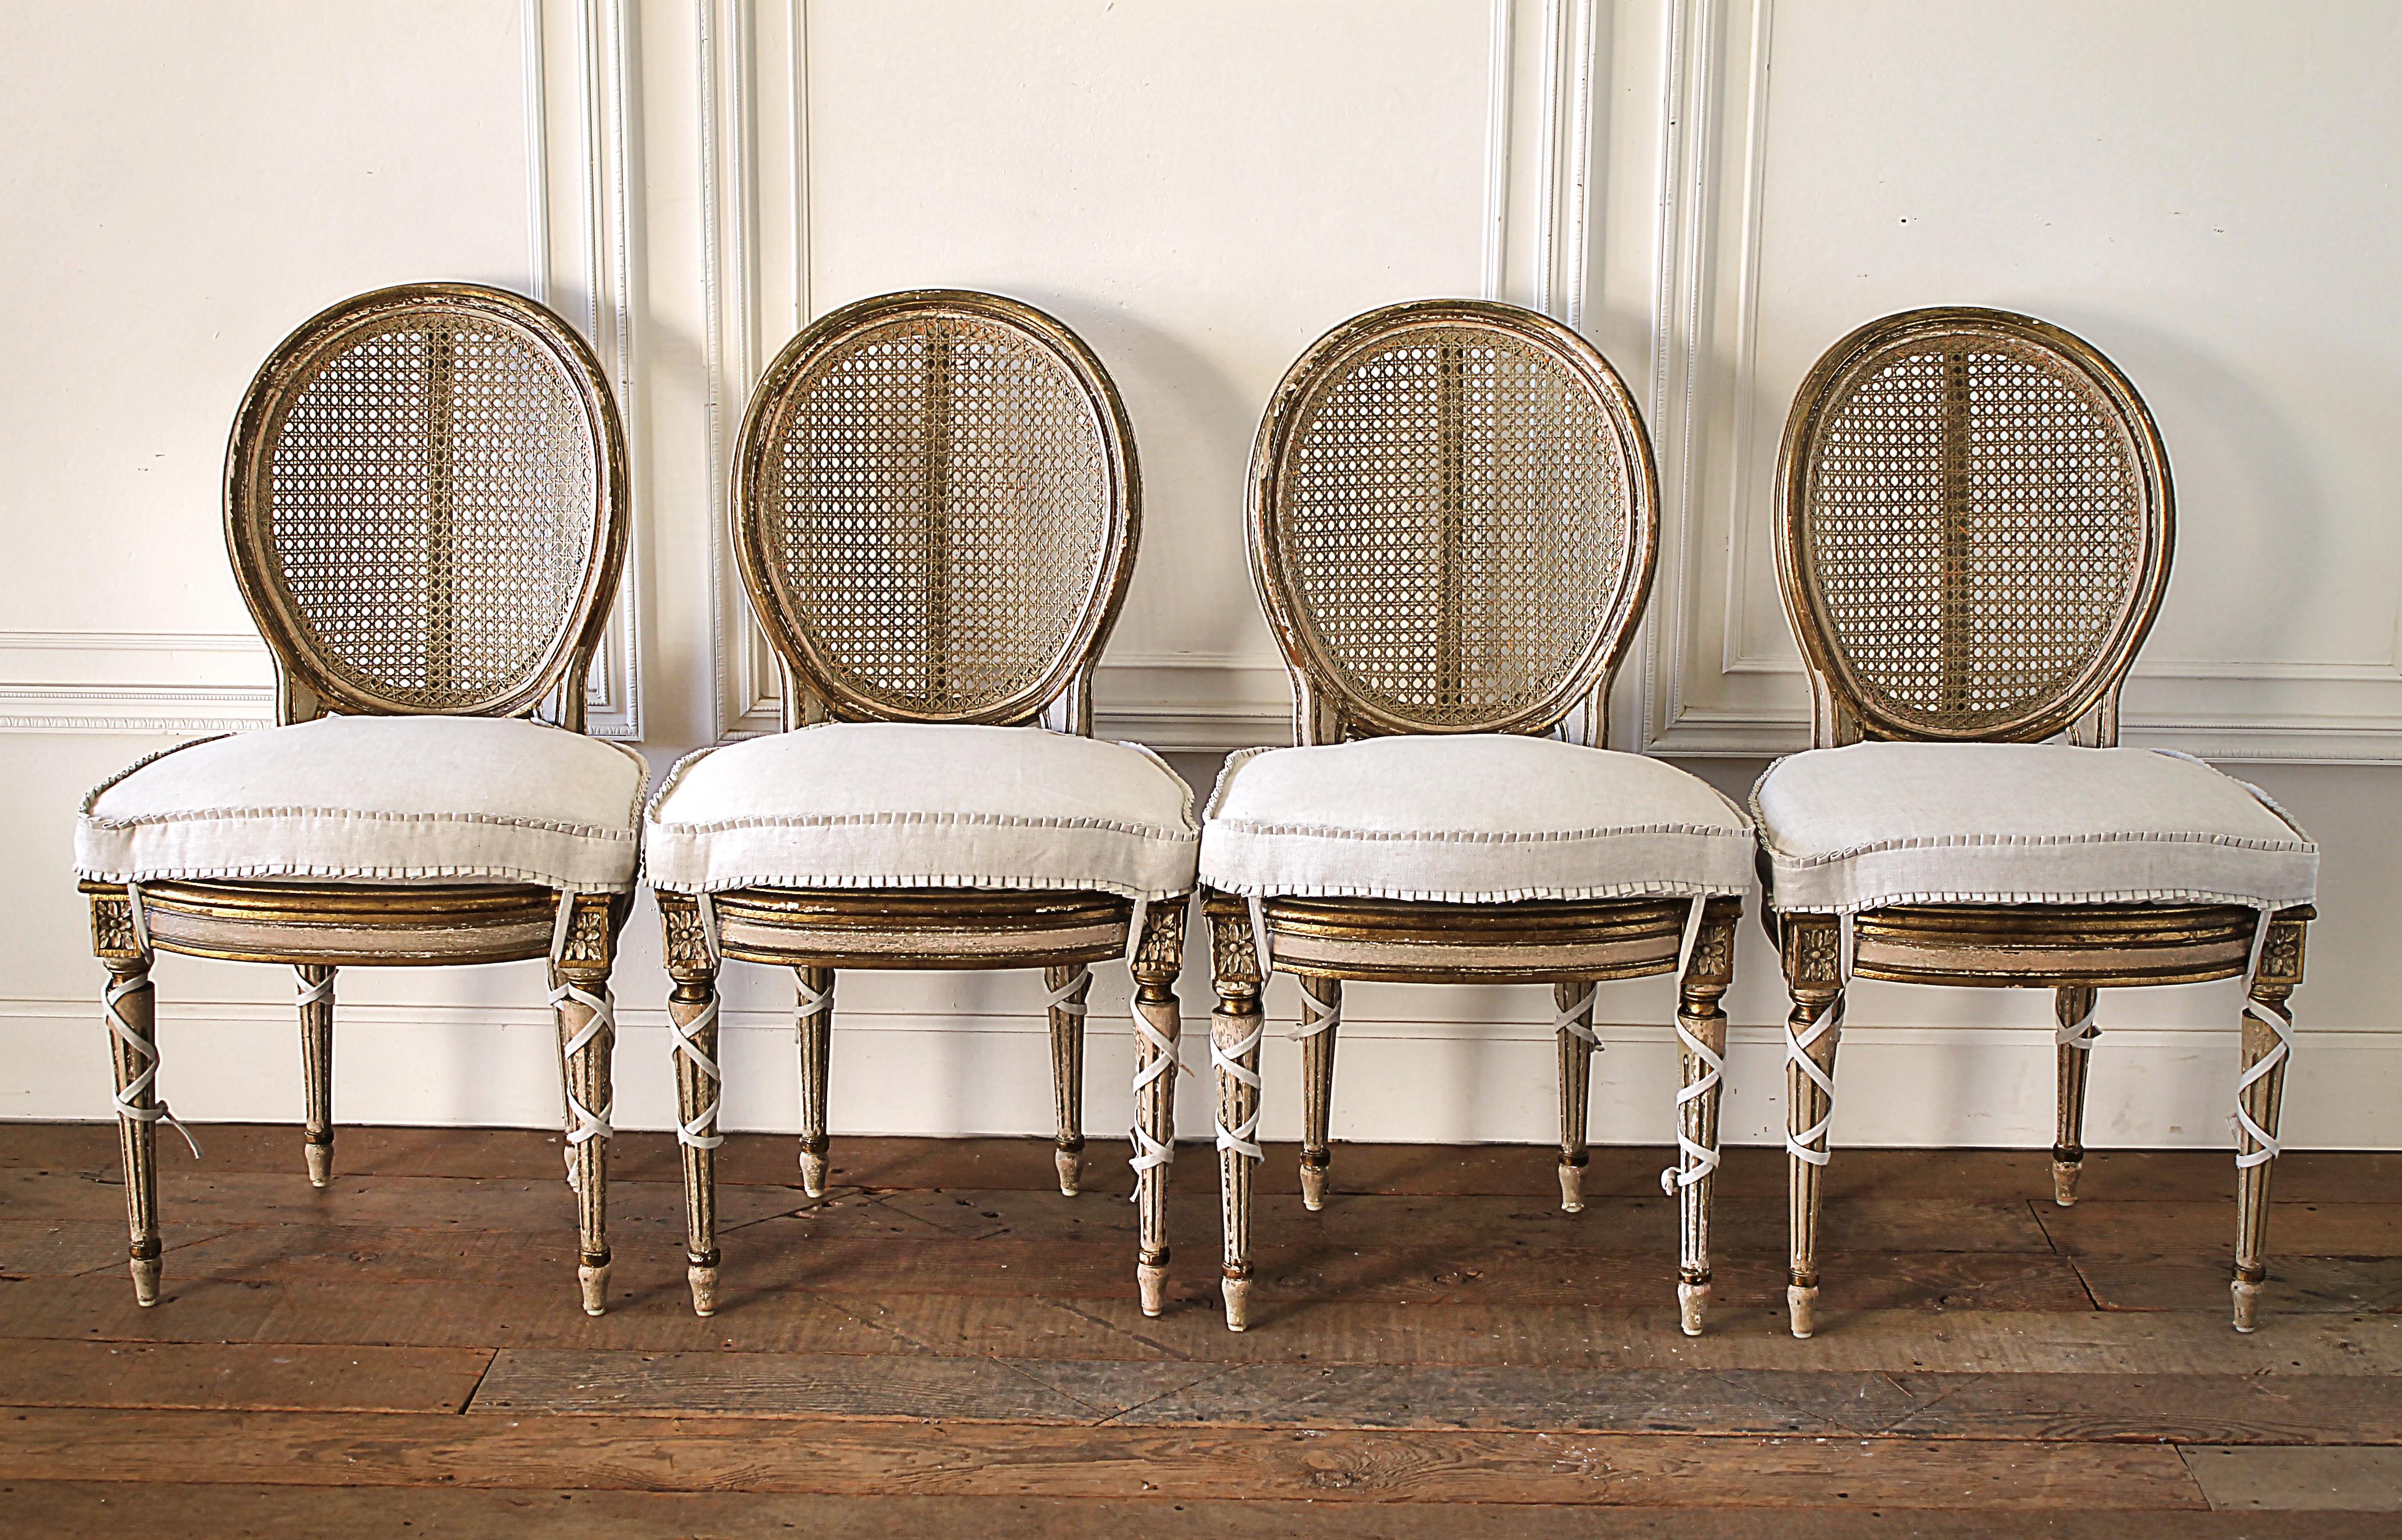 Early 20th century carved and painted Louis XVI style cane back dining chairs
Beautiful painted and gilt trimmed dining chairs with naturally aged patina, perfectly chippy in all the right places. We have sealed the finish to keep the chairs from